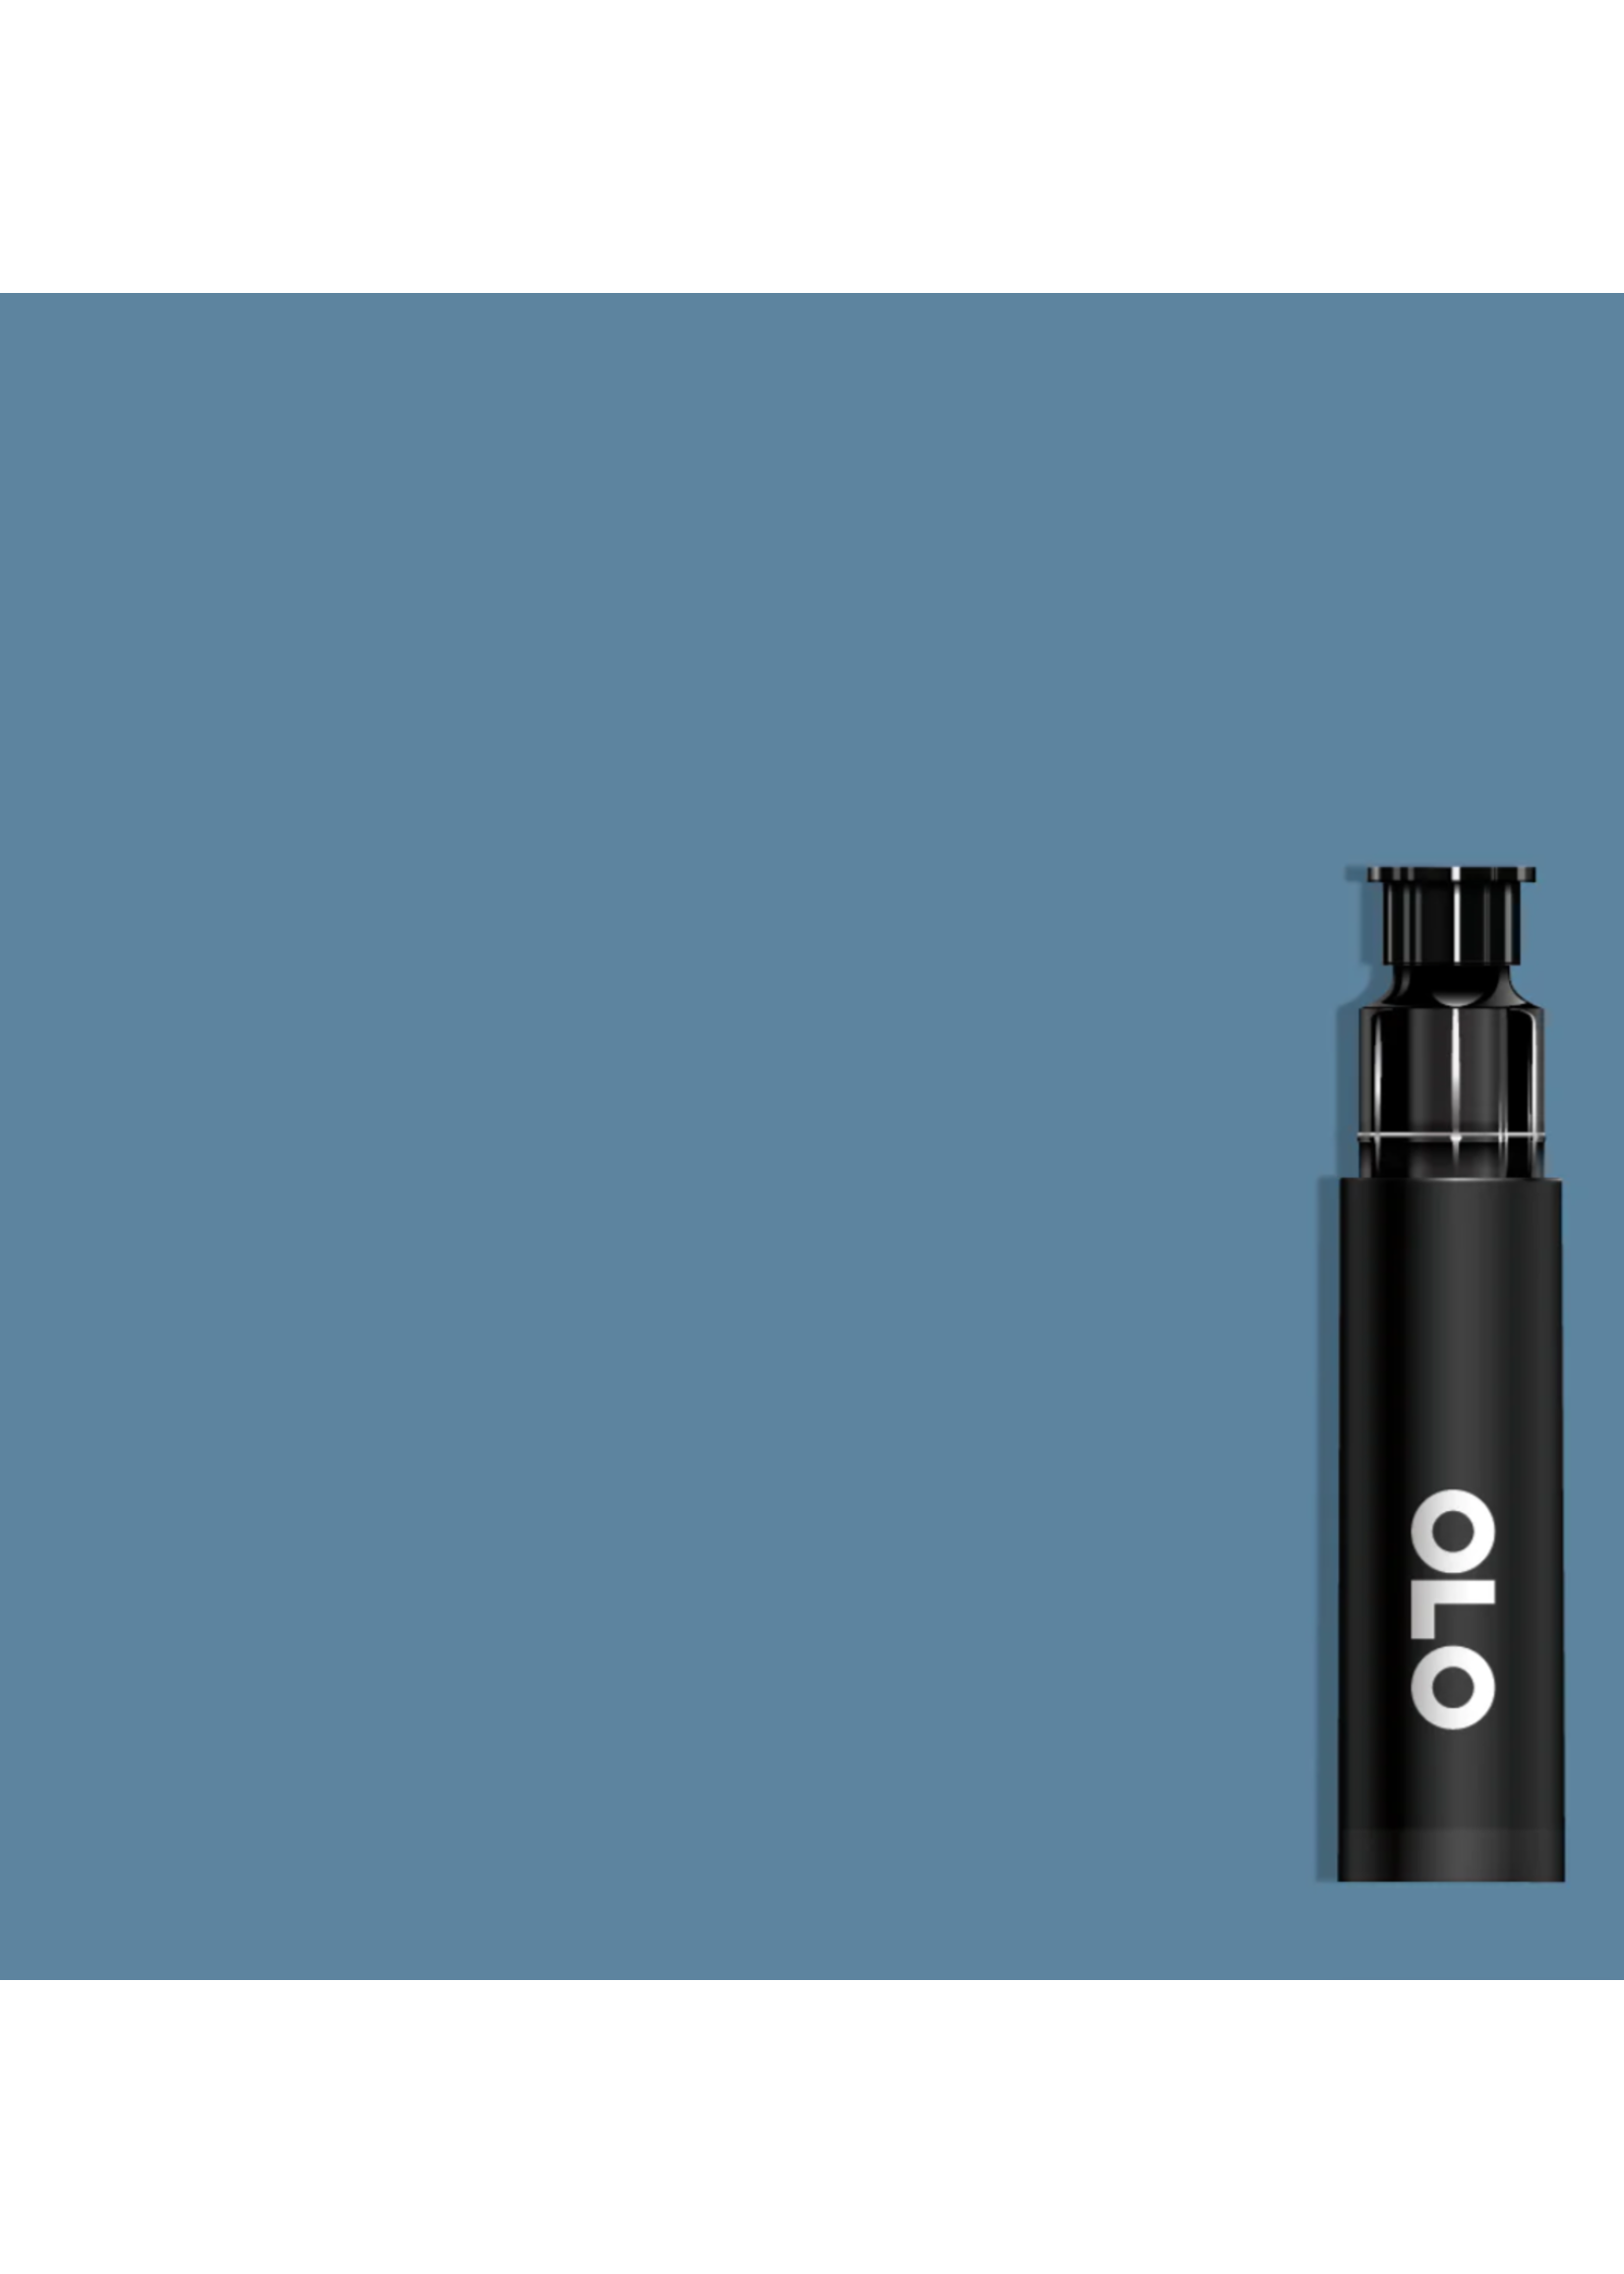 OLO OLO Brush Replacement Cartridge: Vintage Blue